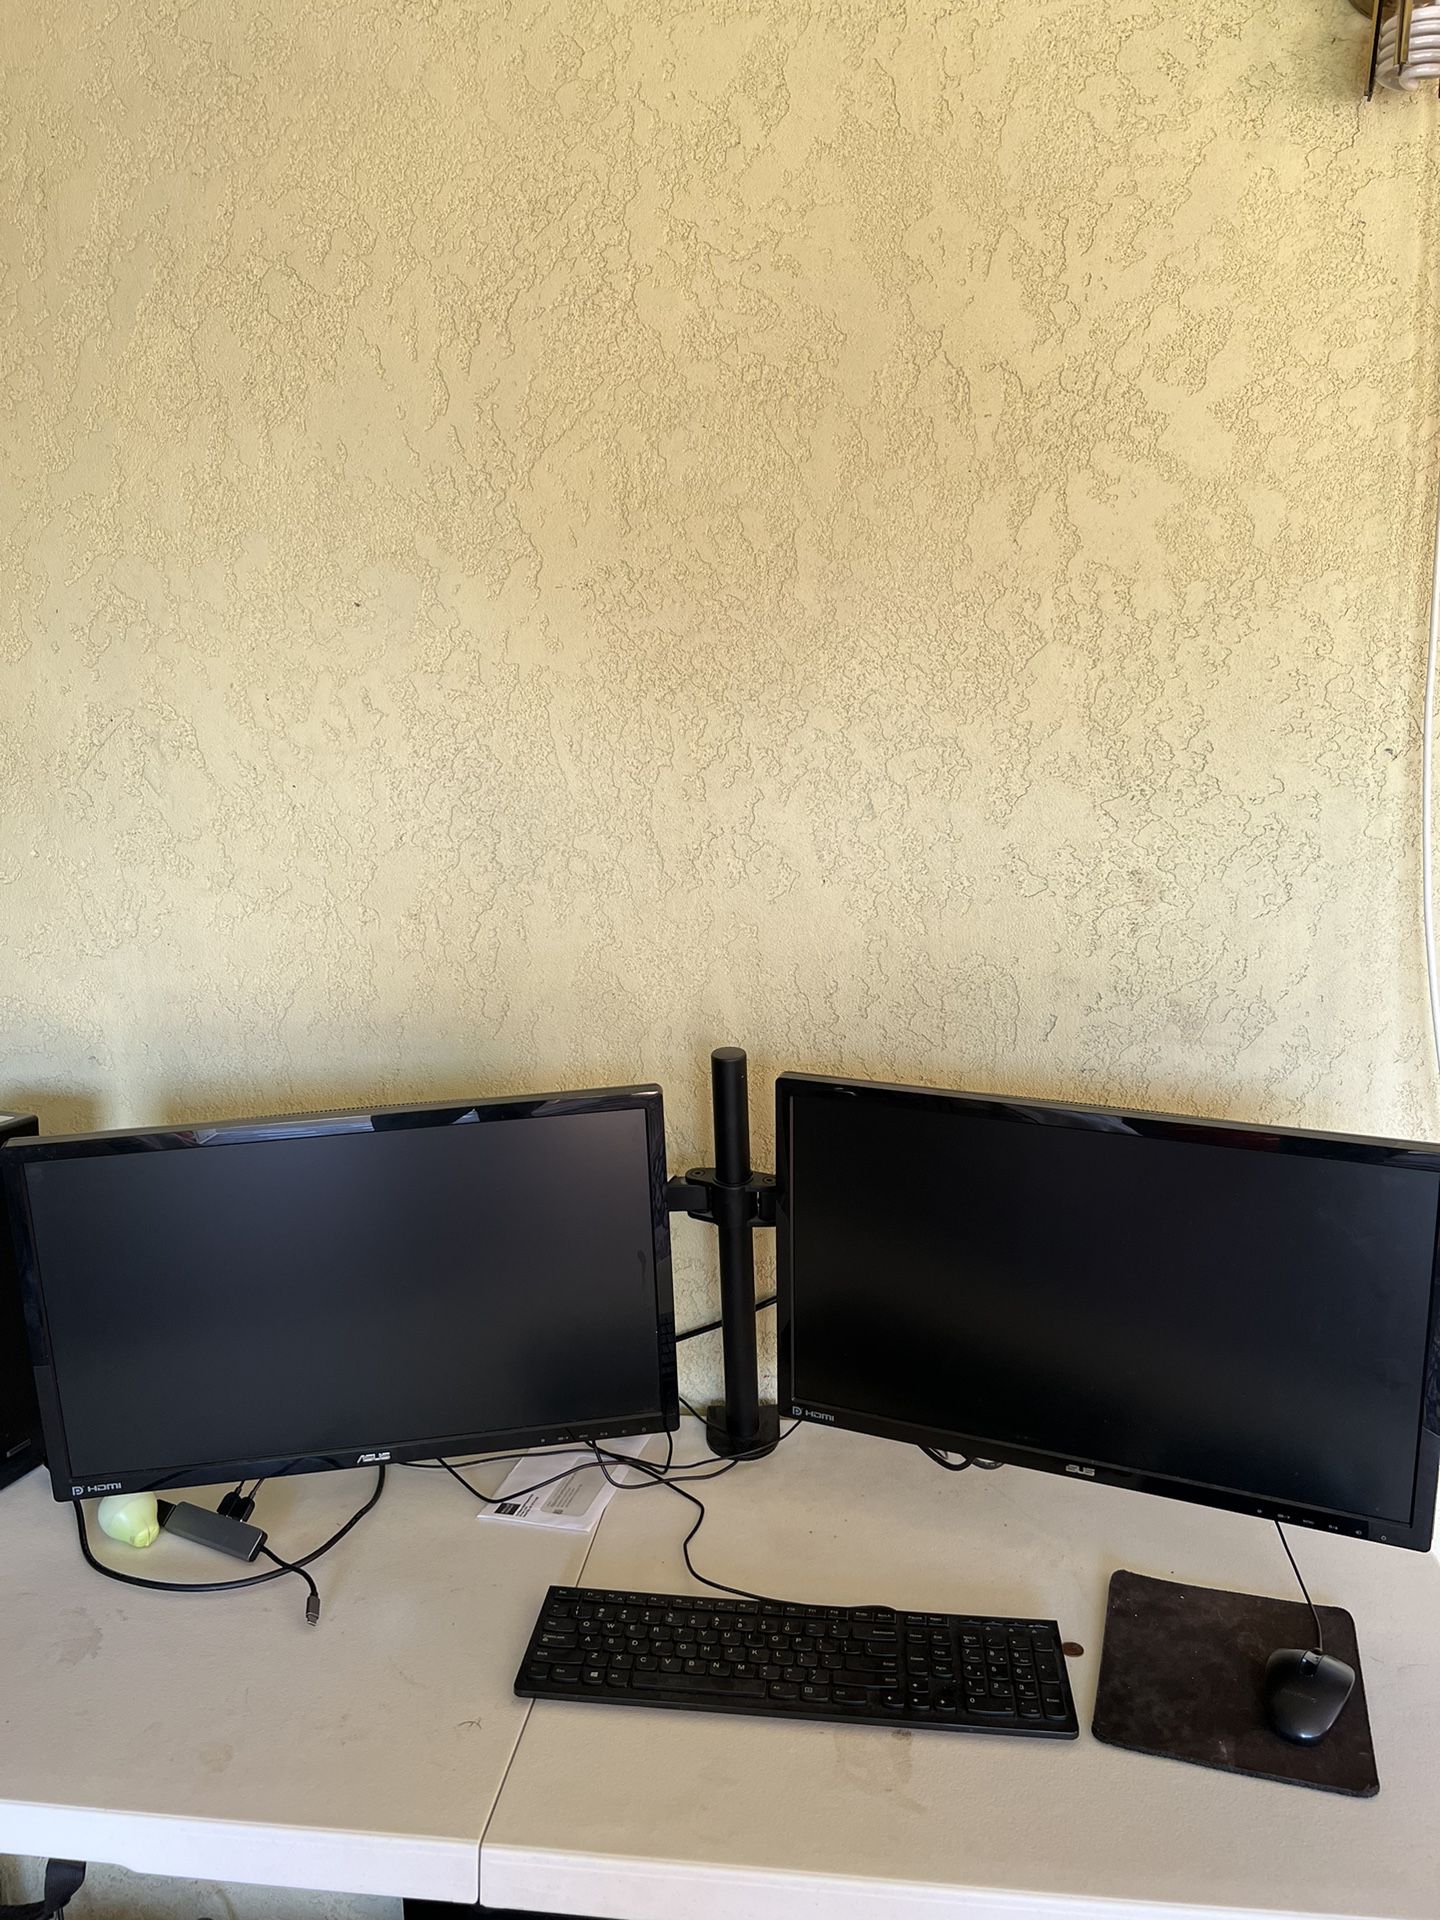 Dual Asus Monitors With Stand And Pc